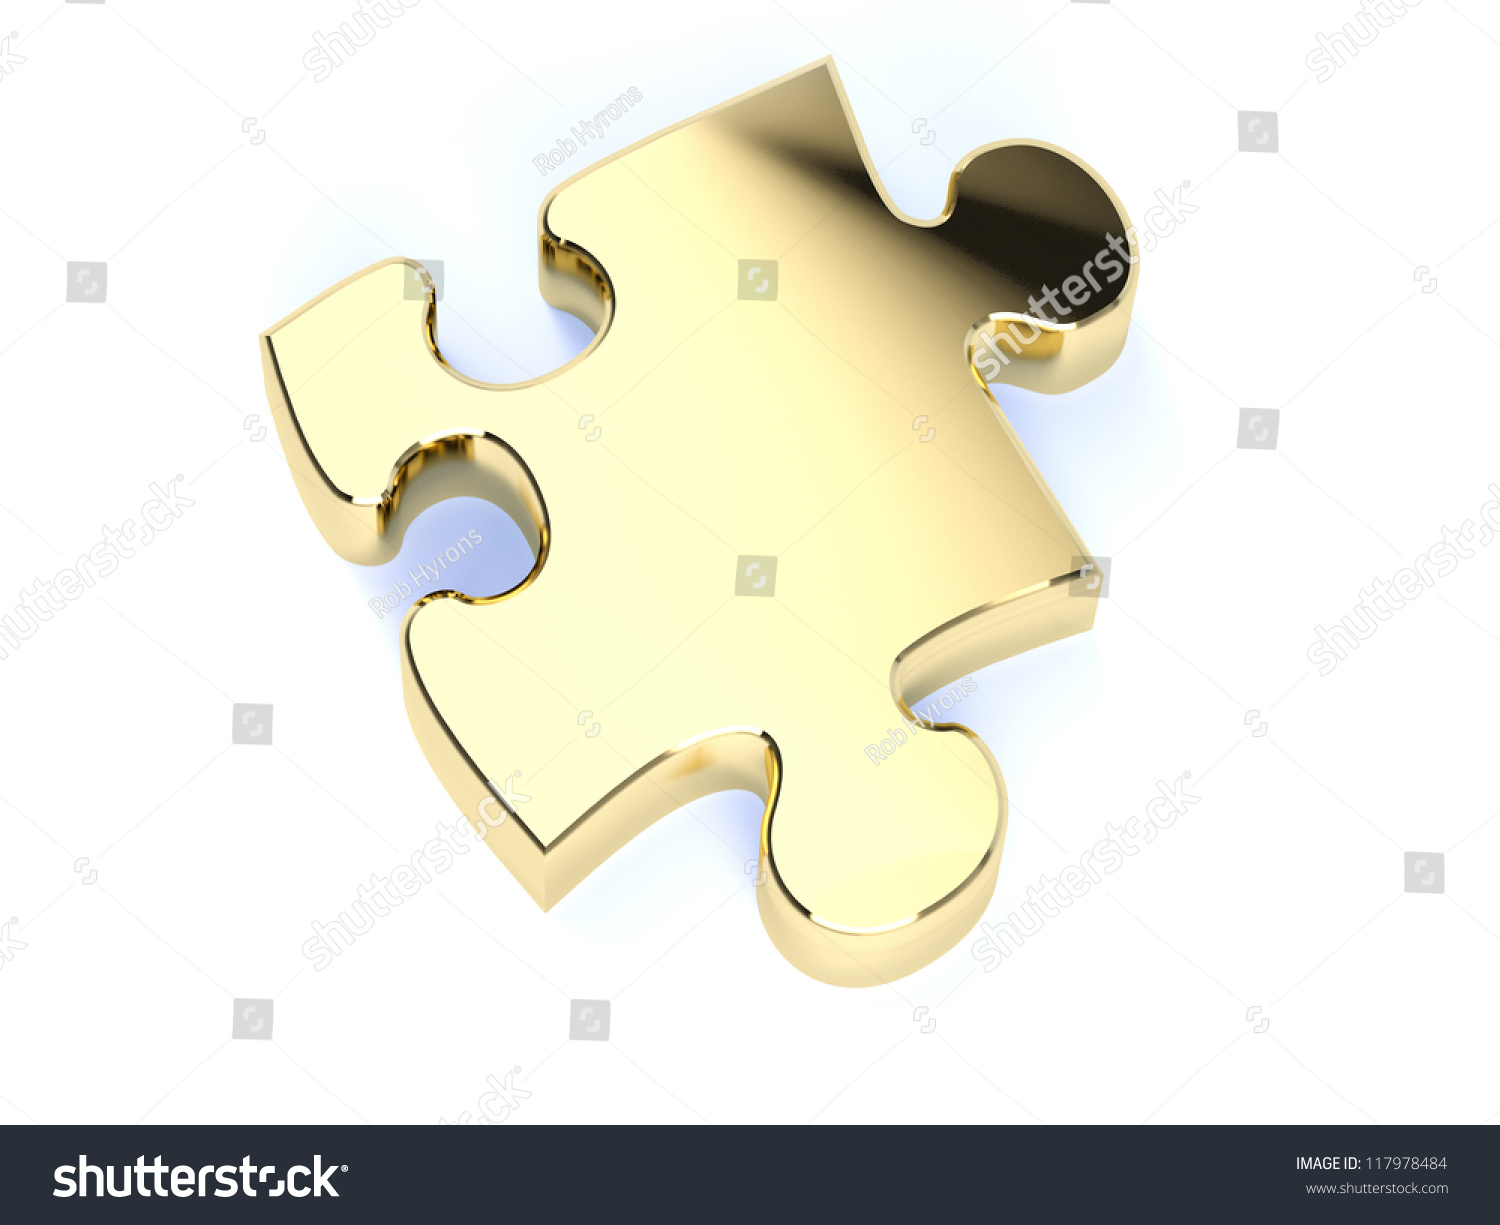 Patch density Disposed Single Gold Jigsaw Puzzle Piece Stock Photo 117978484 | Shutterstock